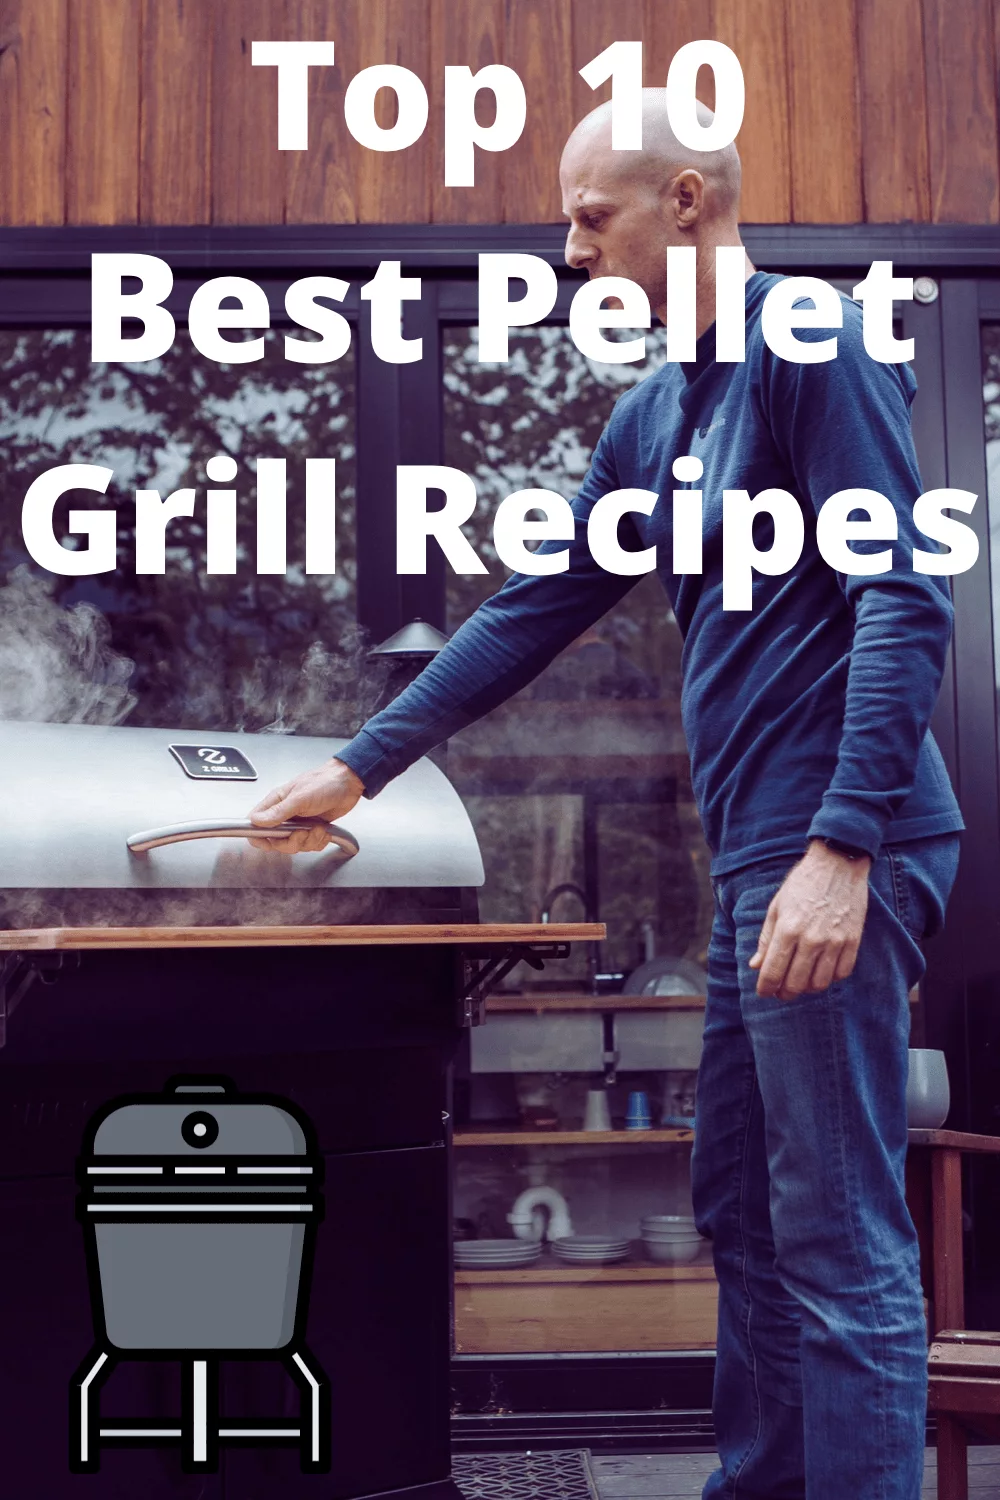 Top 10 Best Pellet Grill Recipes to Smoke This Weekend